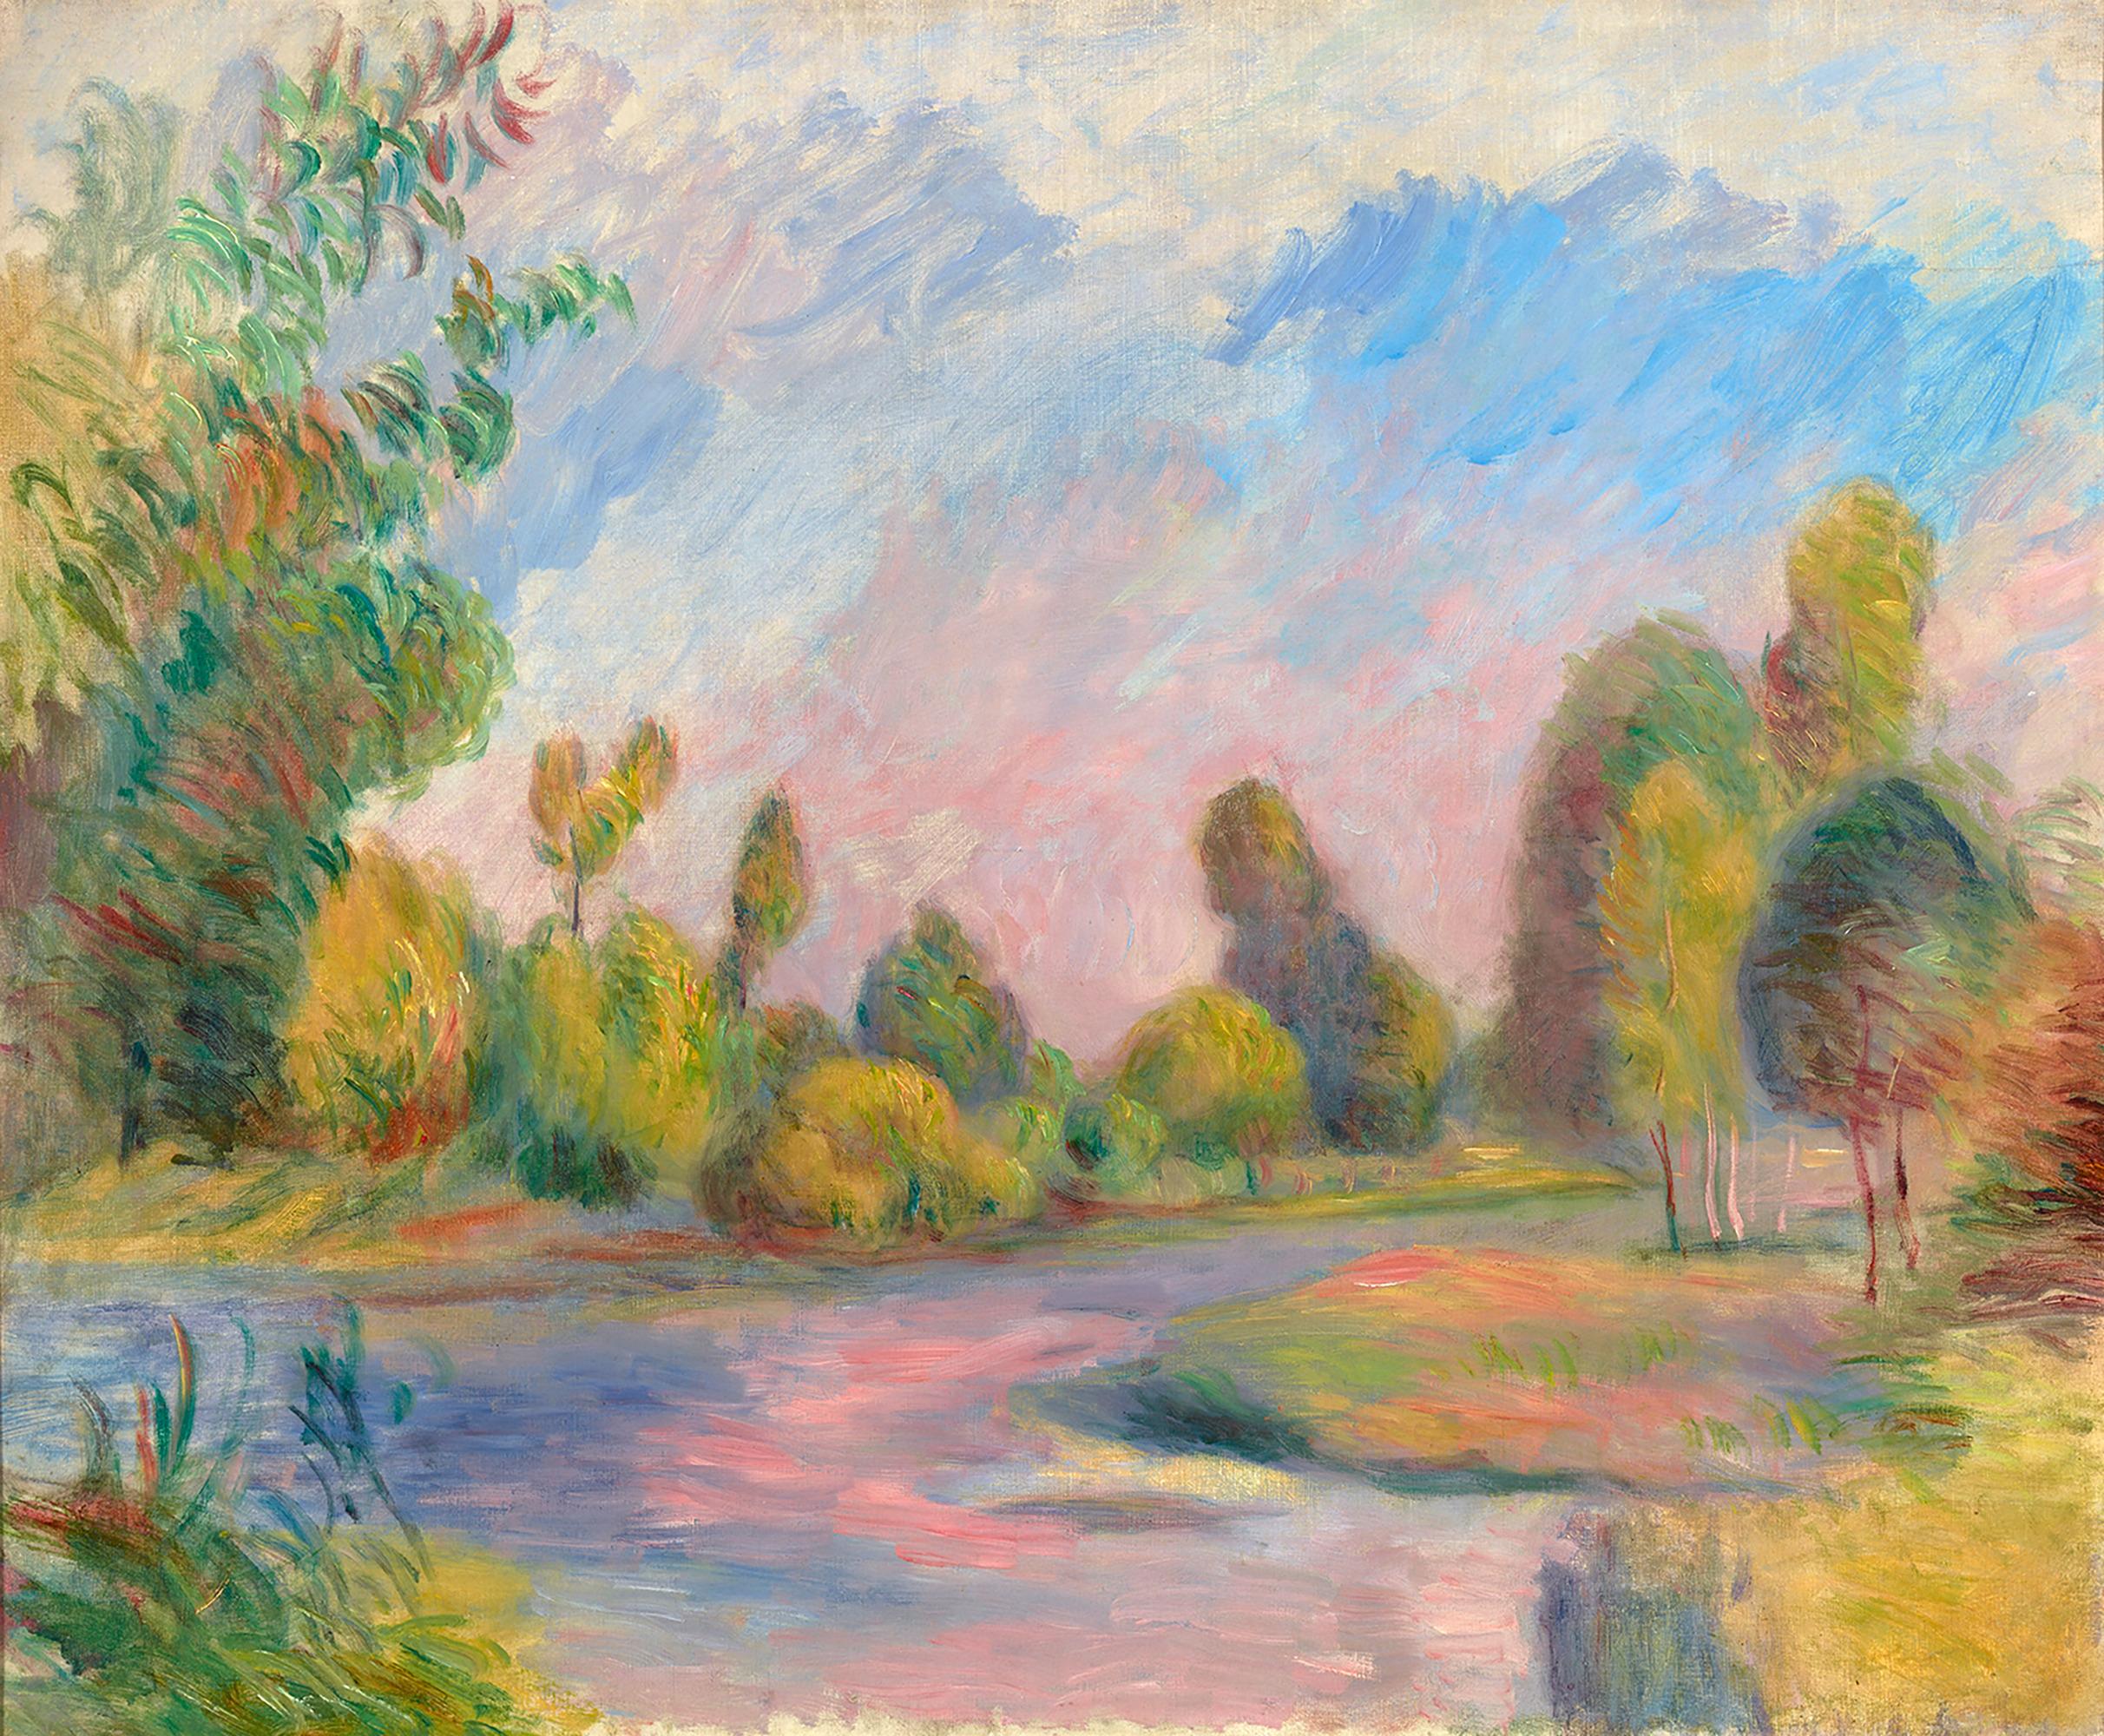 Pierre-Auguste Renoir
1841-1919  French

Au bord de la rivière
(Along the River)

Oil on canvas

"Renoir may be the only great painter who has never painted a sad picture."
- Octave Mirbeau, journalist and art critic

Perhaps more than any other